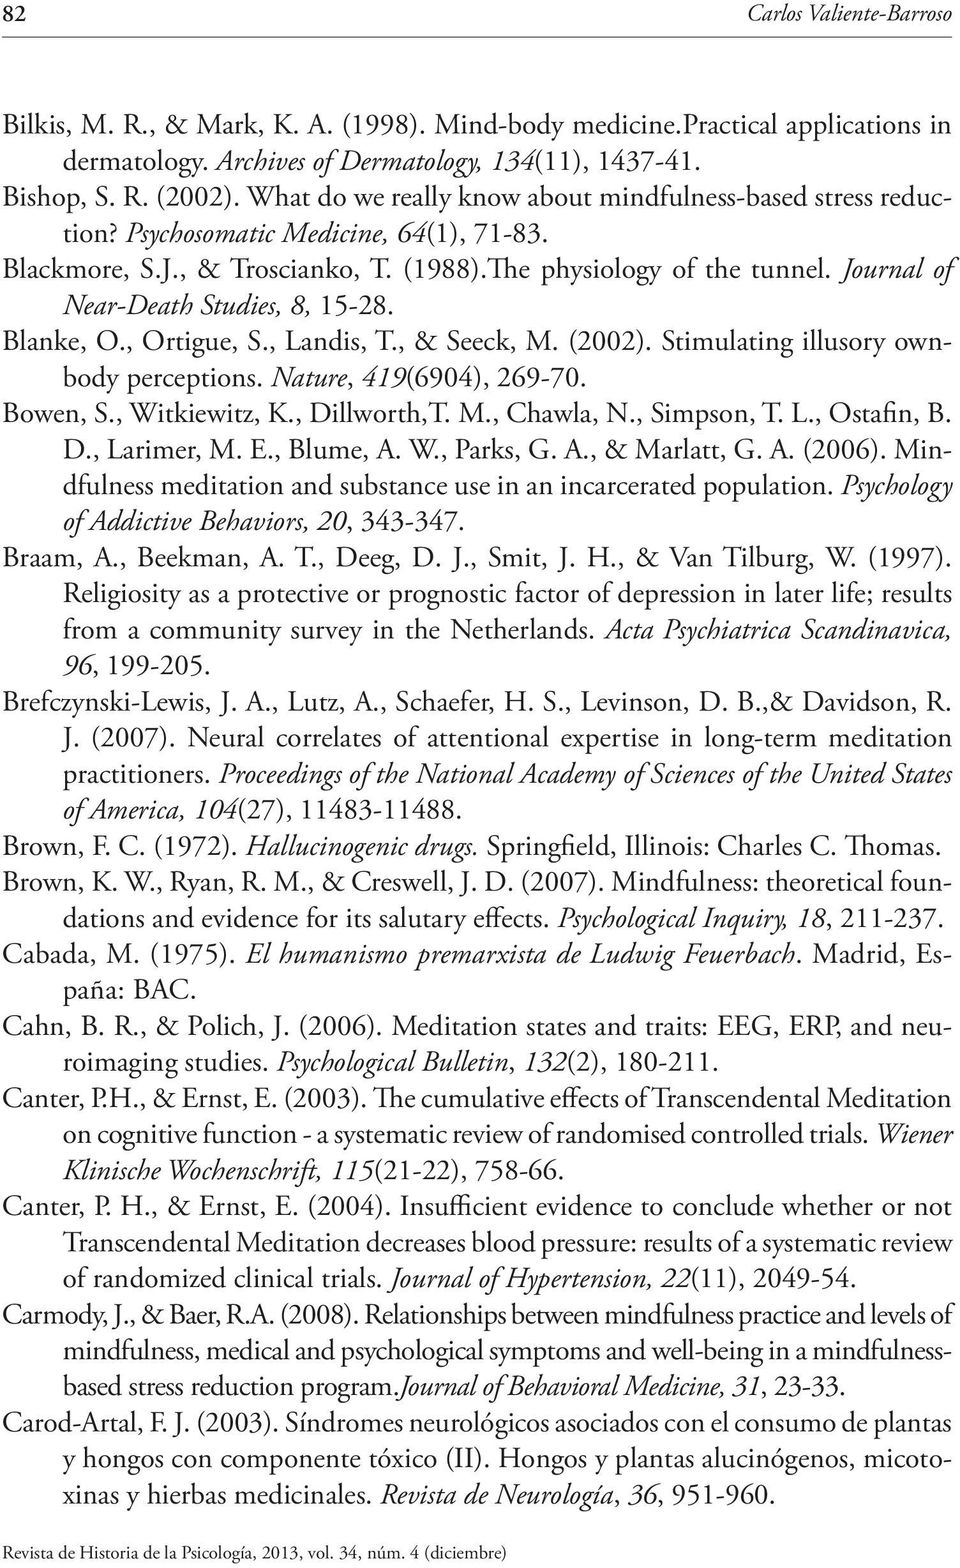 Journal of Near-Death Studies, 8, 15-28. Blanke, O., Ortigue, S., Landis, T., & Seeck, M. (2002). Stimulating illusory ownbody perceptions. Nature, 419(6904), 269-70. Bowen, S., Witkiewitz, K.